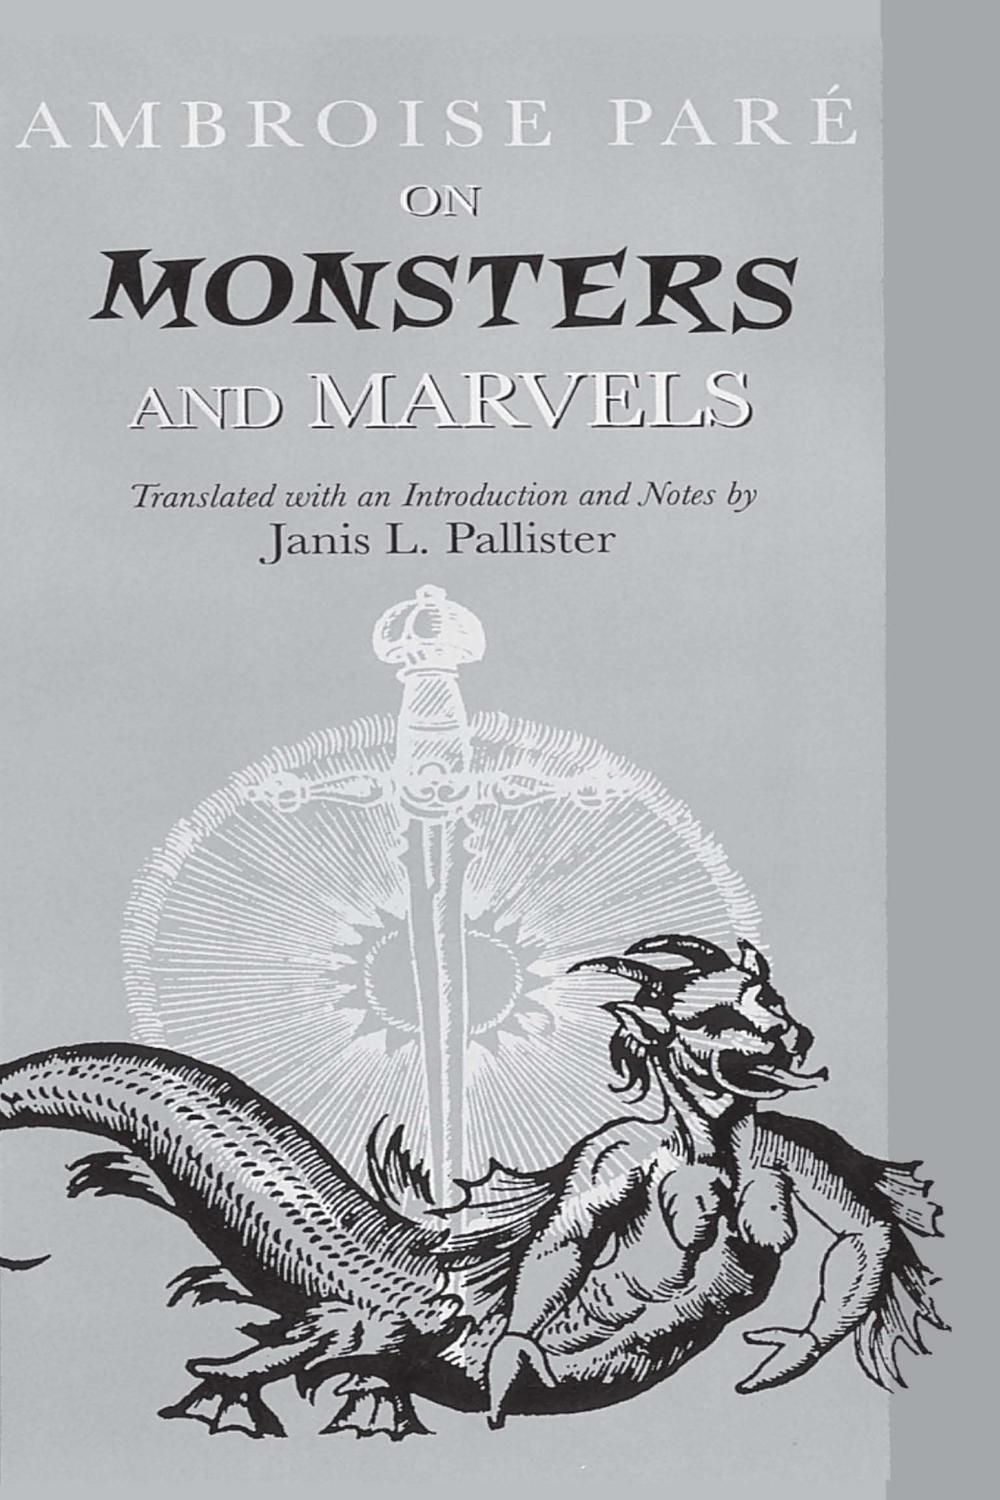 On Monsters and Marvels - Ambroise Pare, Janis L. Pallister